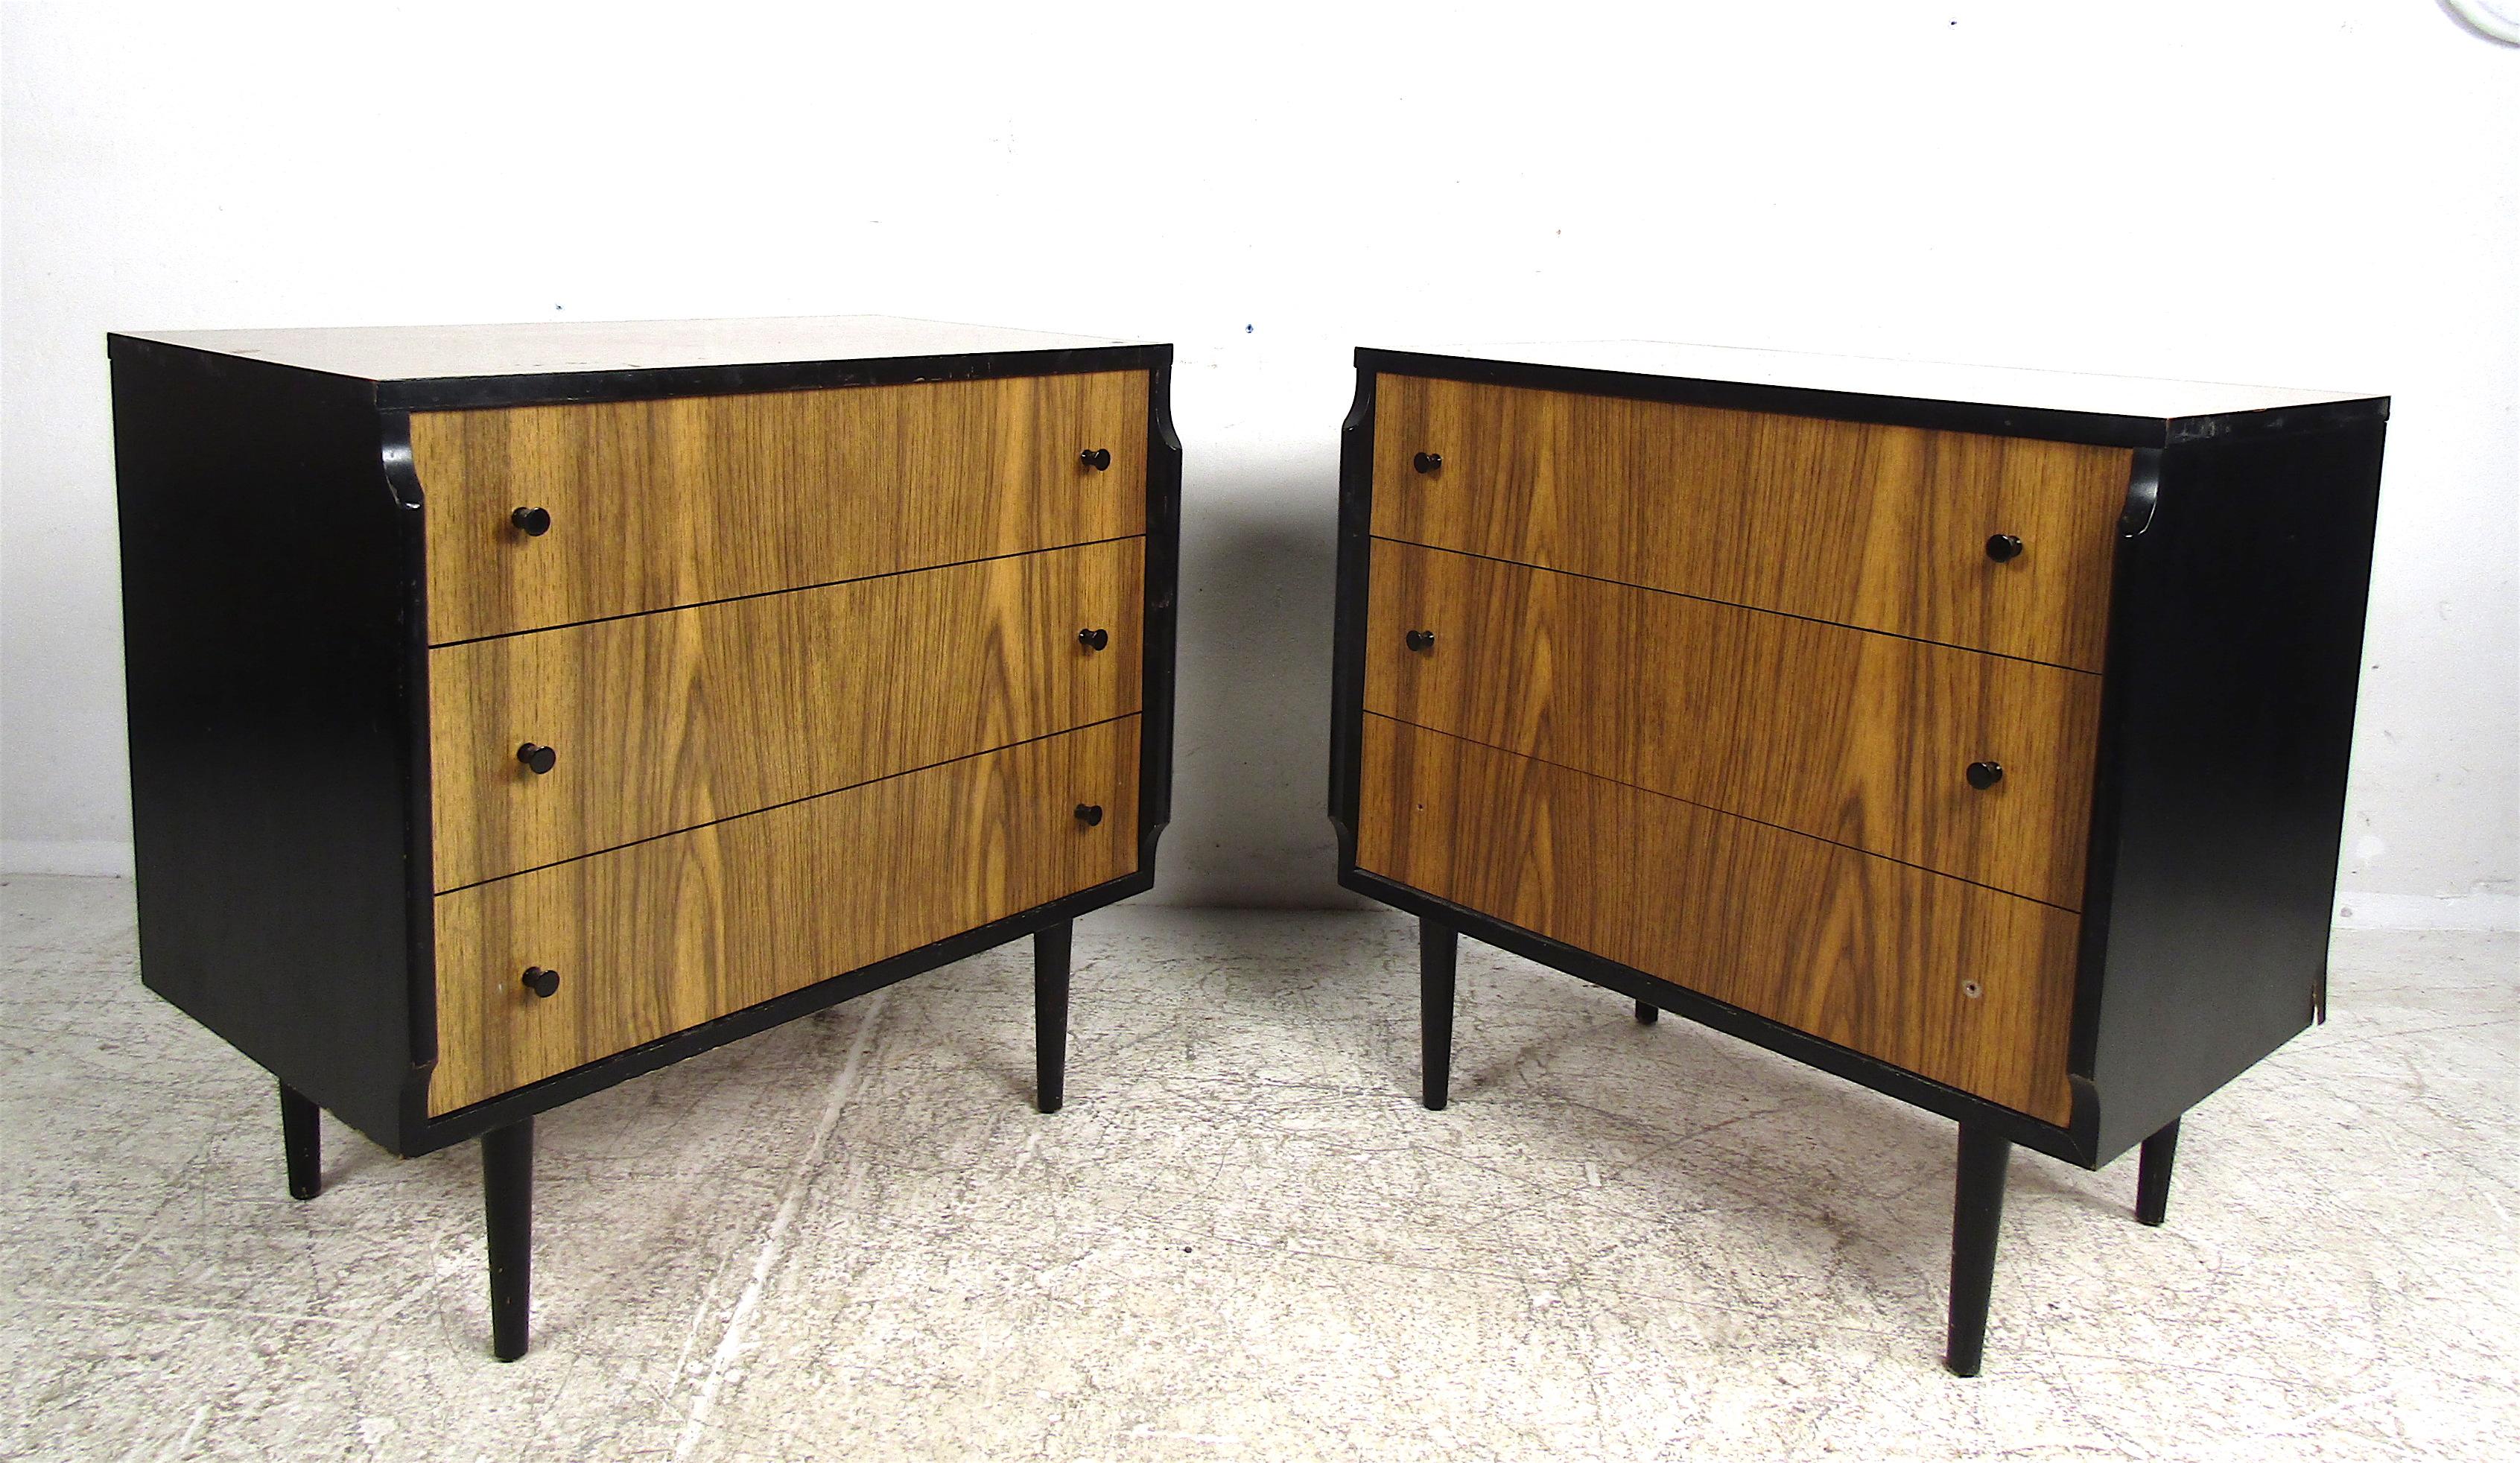 This wonderful vintage modern set features a headboard, desk, and two matching chests of drawers. A wild desk with an unusual shape and a spoked headboard adds to the allure. The pair of chests offer plenty of storage space within their three hefty